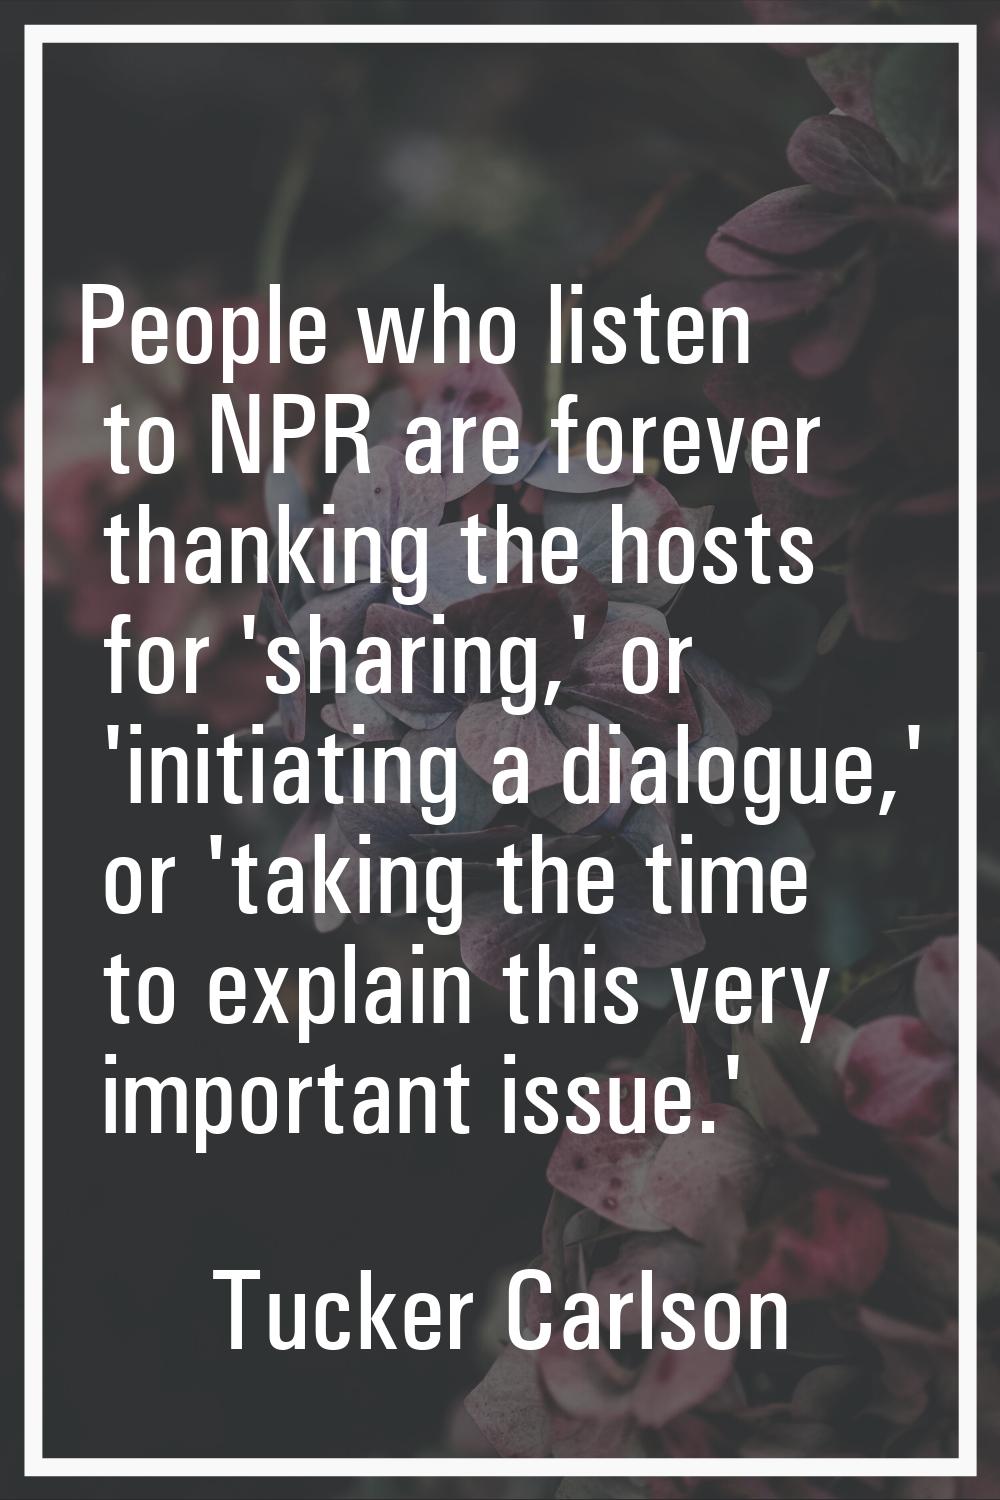 People who listen to NPR are forever thanking the hosts for 'sharing,' or 'initiating a dialogue,' 